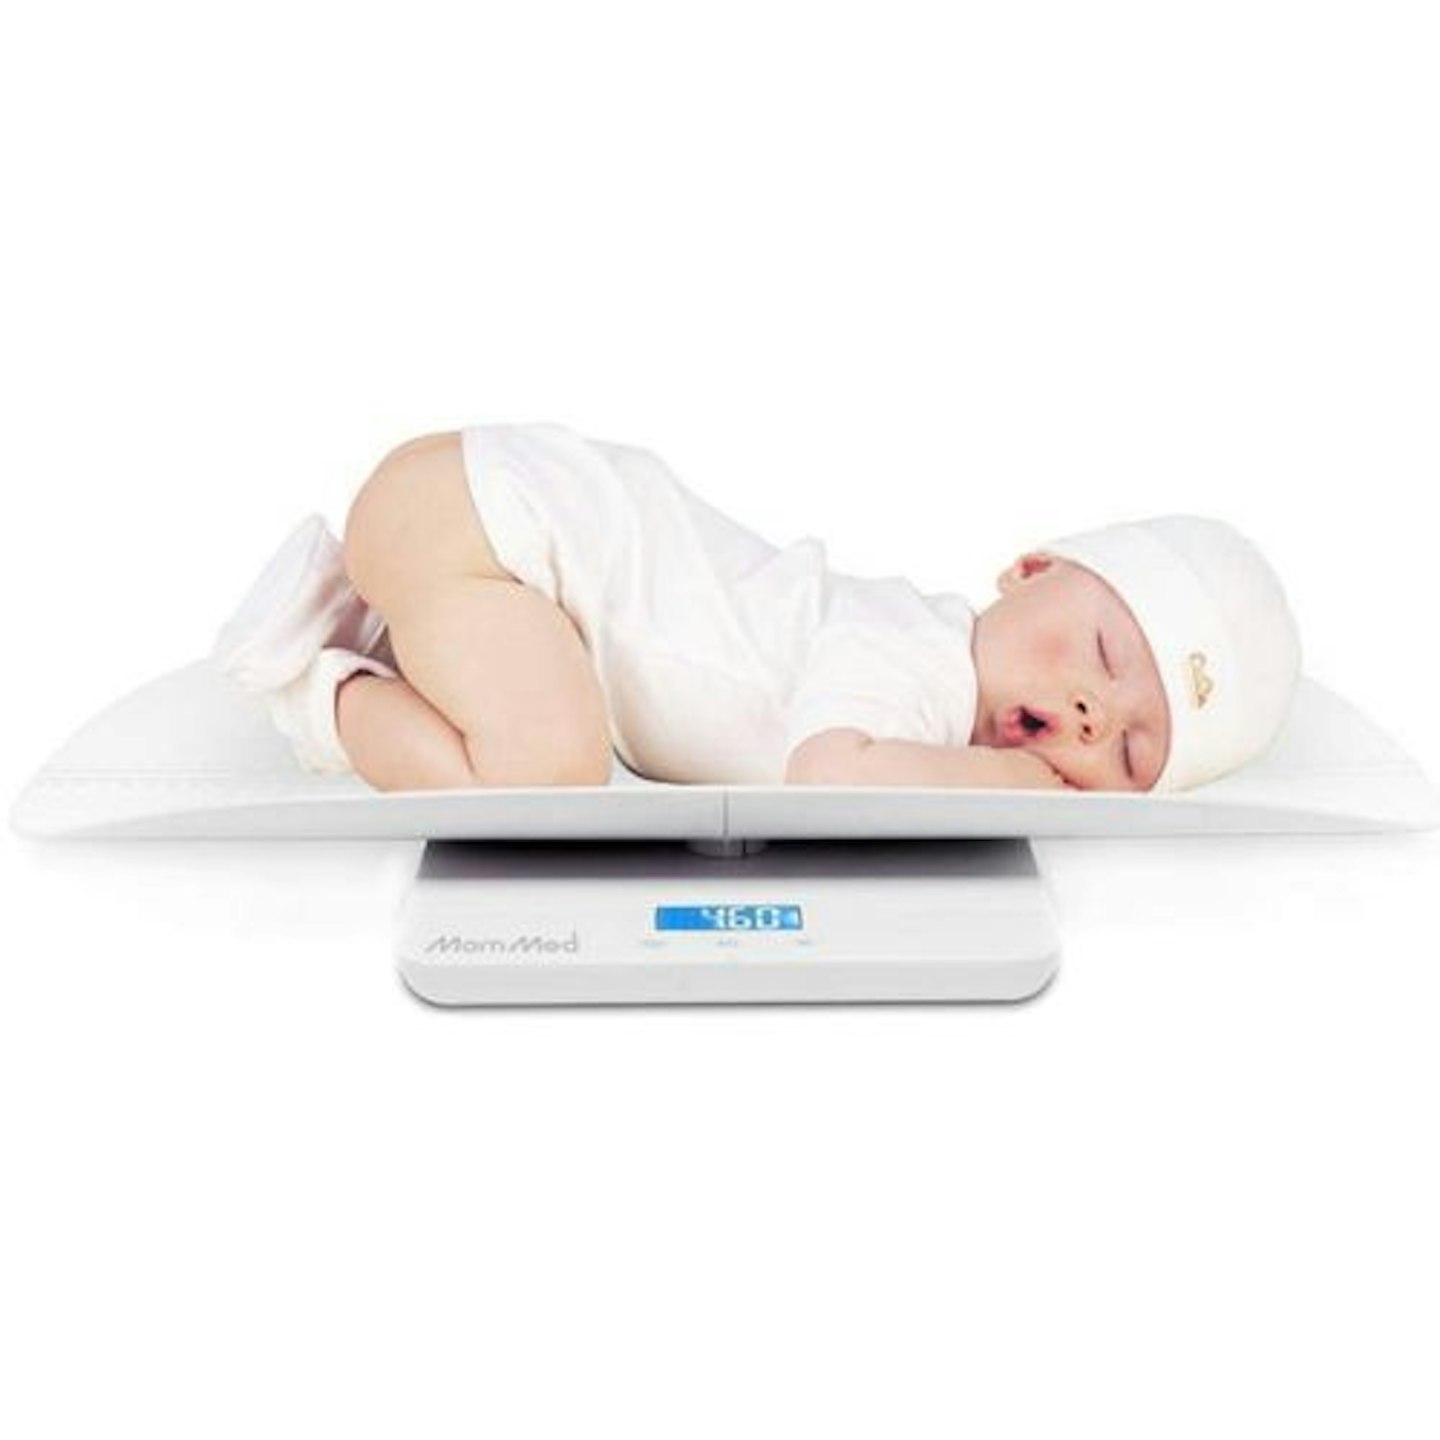 Avec Maman AM05 Baby Weighing Scale Digital Scale Babies, Infants